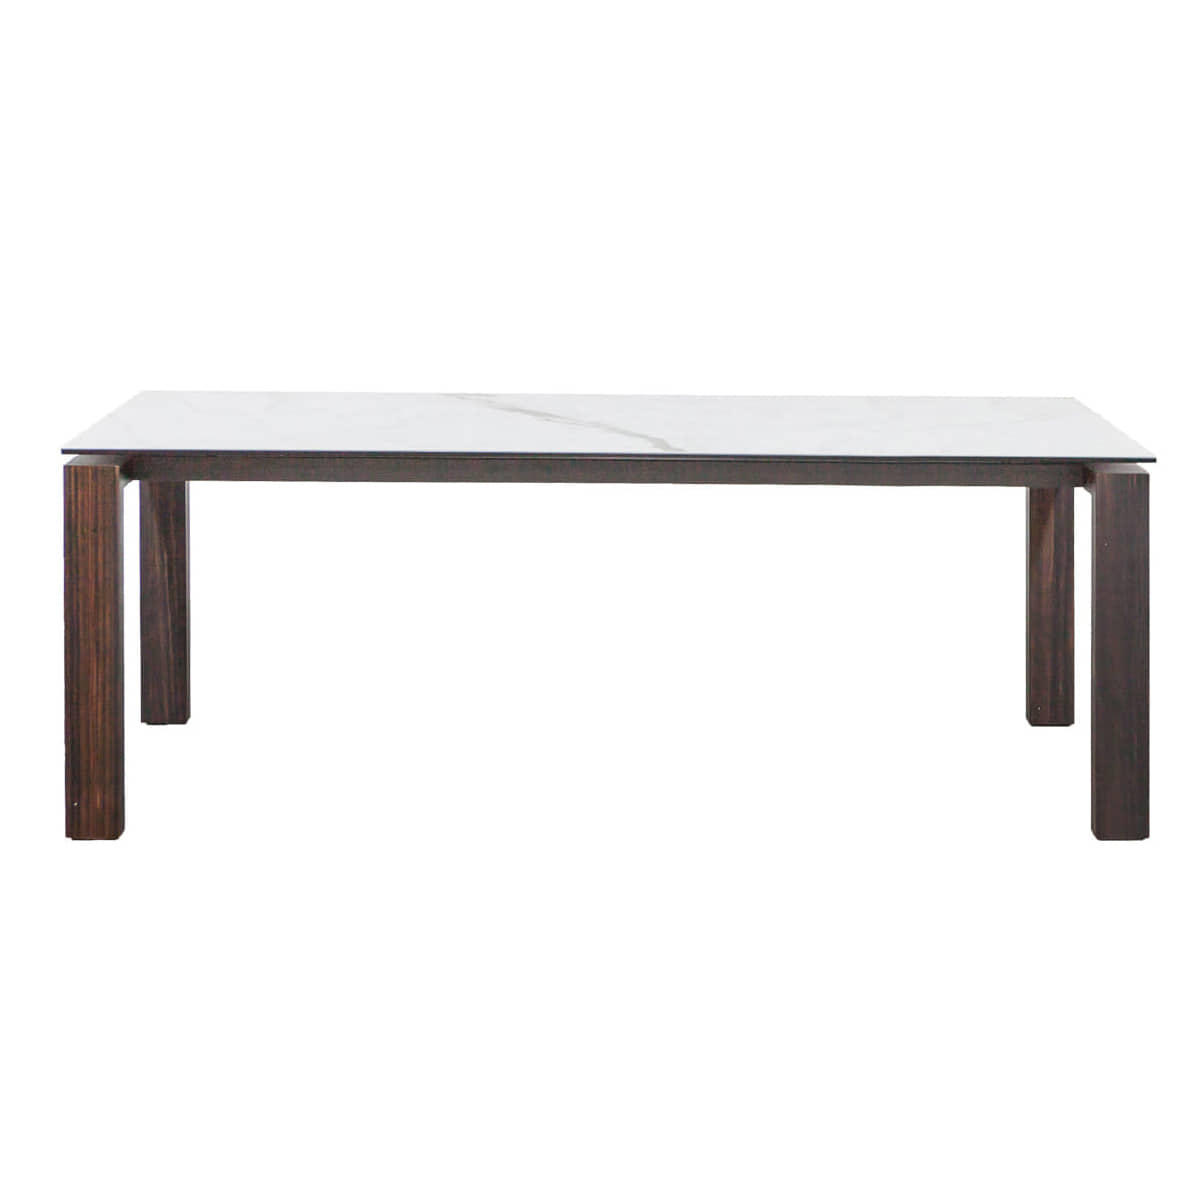 ITALSTUDIO Neptuns Dining Table 넵튠 식탁 - 200DESIGNED BY ITALY